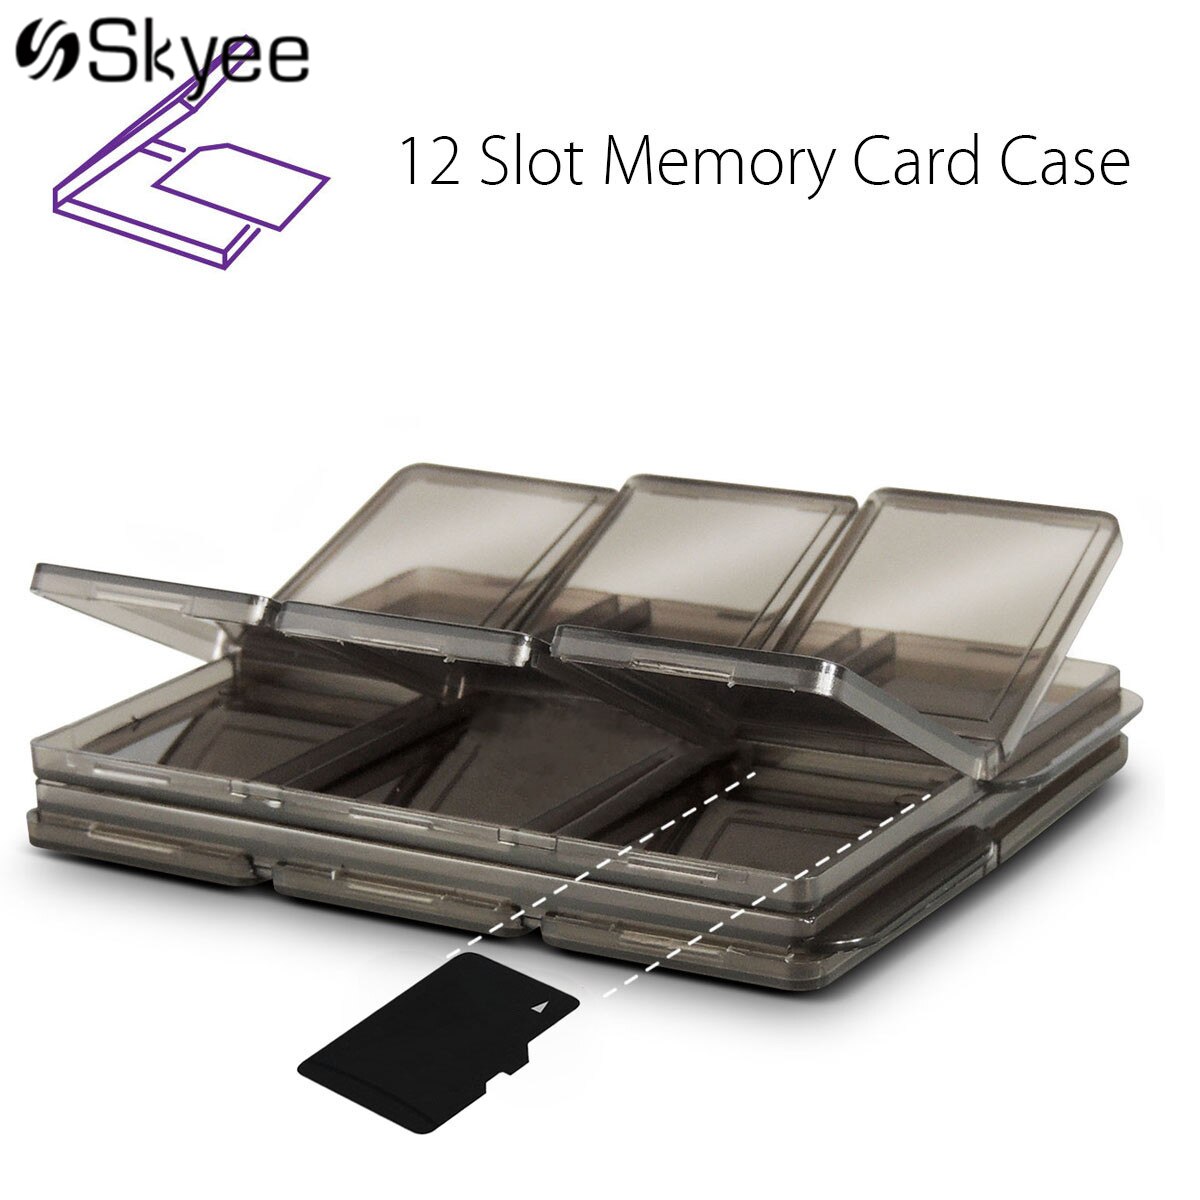 S SKYEE Opvouwbare 12 SIM/Micro SD/TF/XD Geheugenkaart Storage Case Box Holder Carrying Protector koffie 90x74x11mm